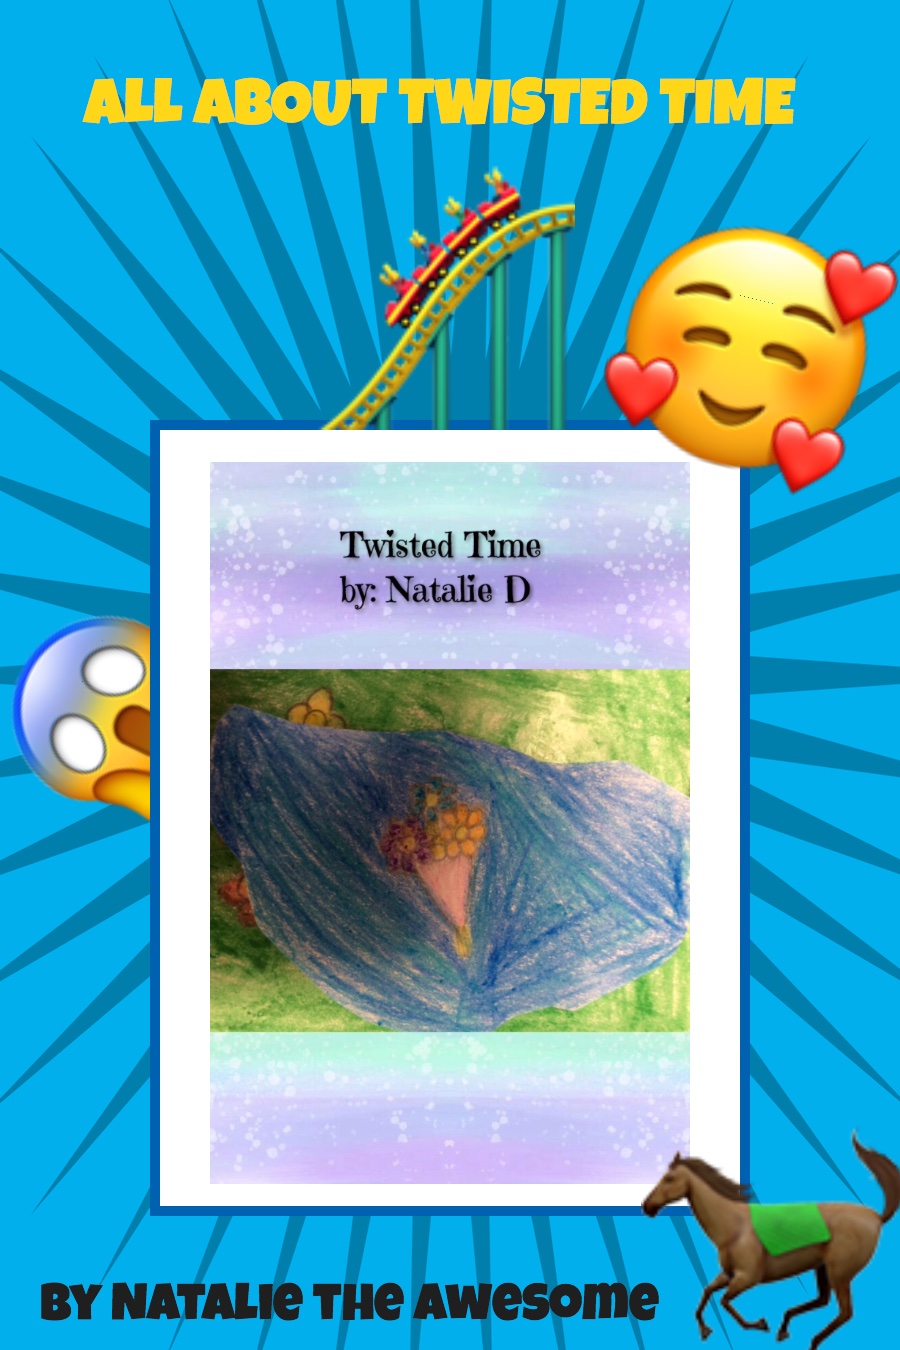 All About Twisted Time by Natalie D